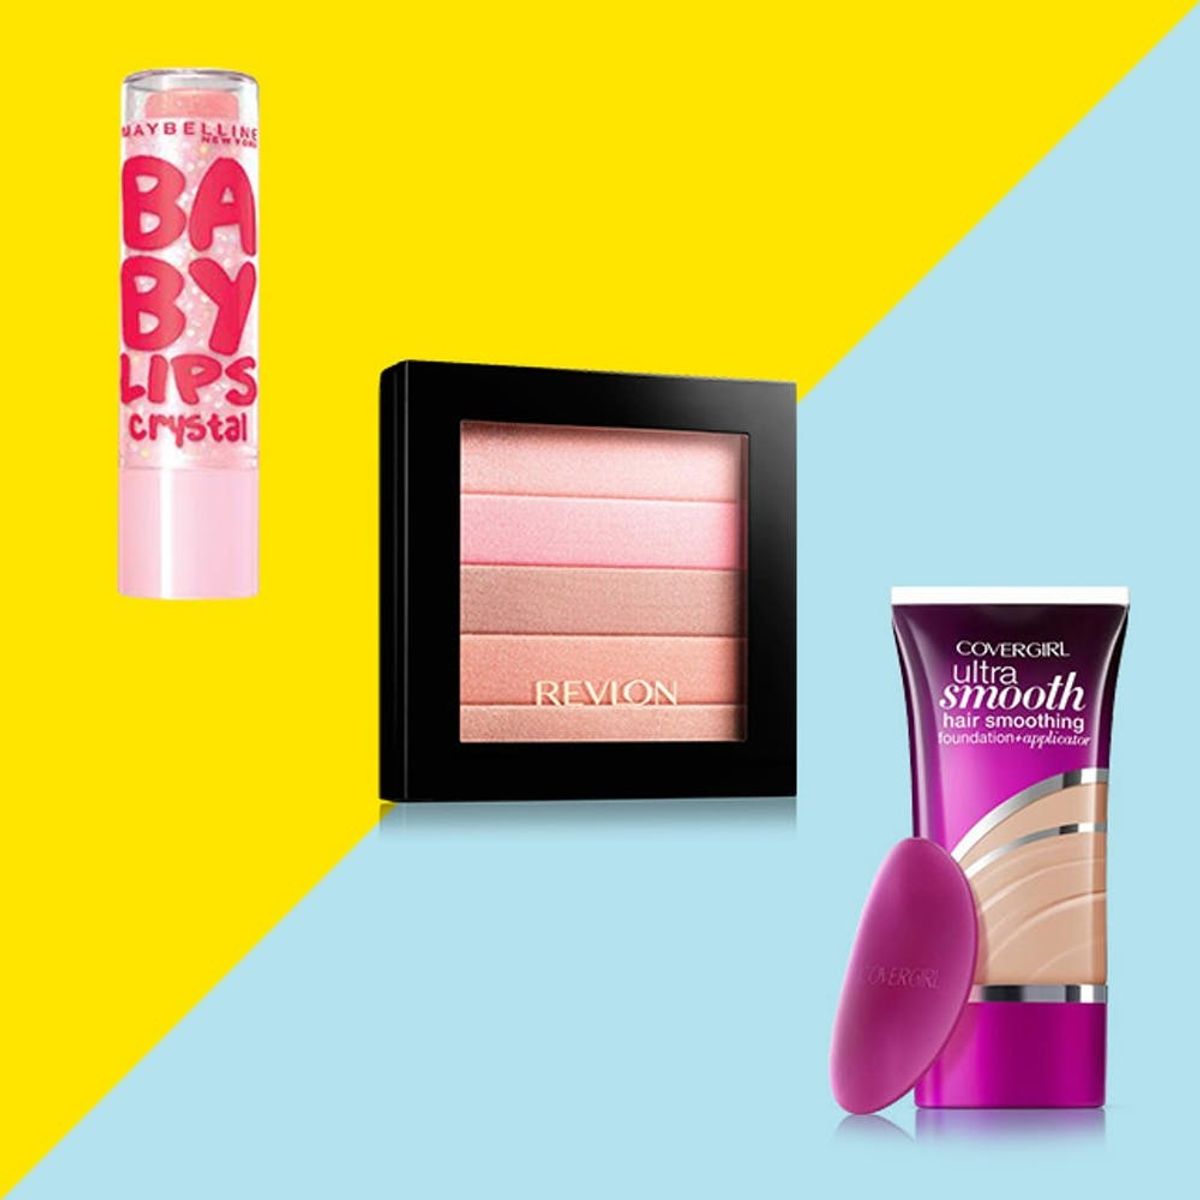 6 Makeup Essentials to Try This Weekend for Under $15